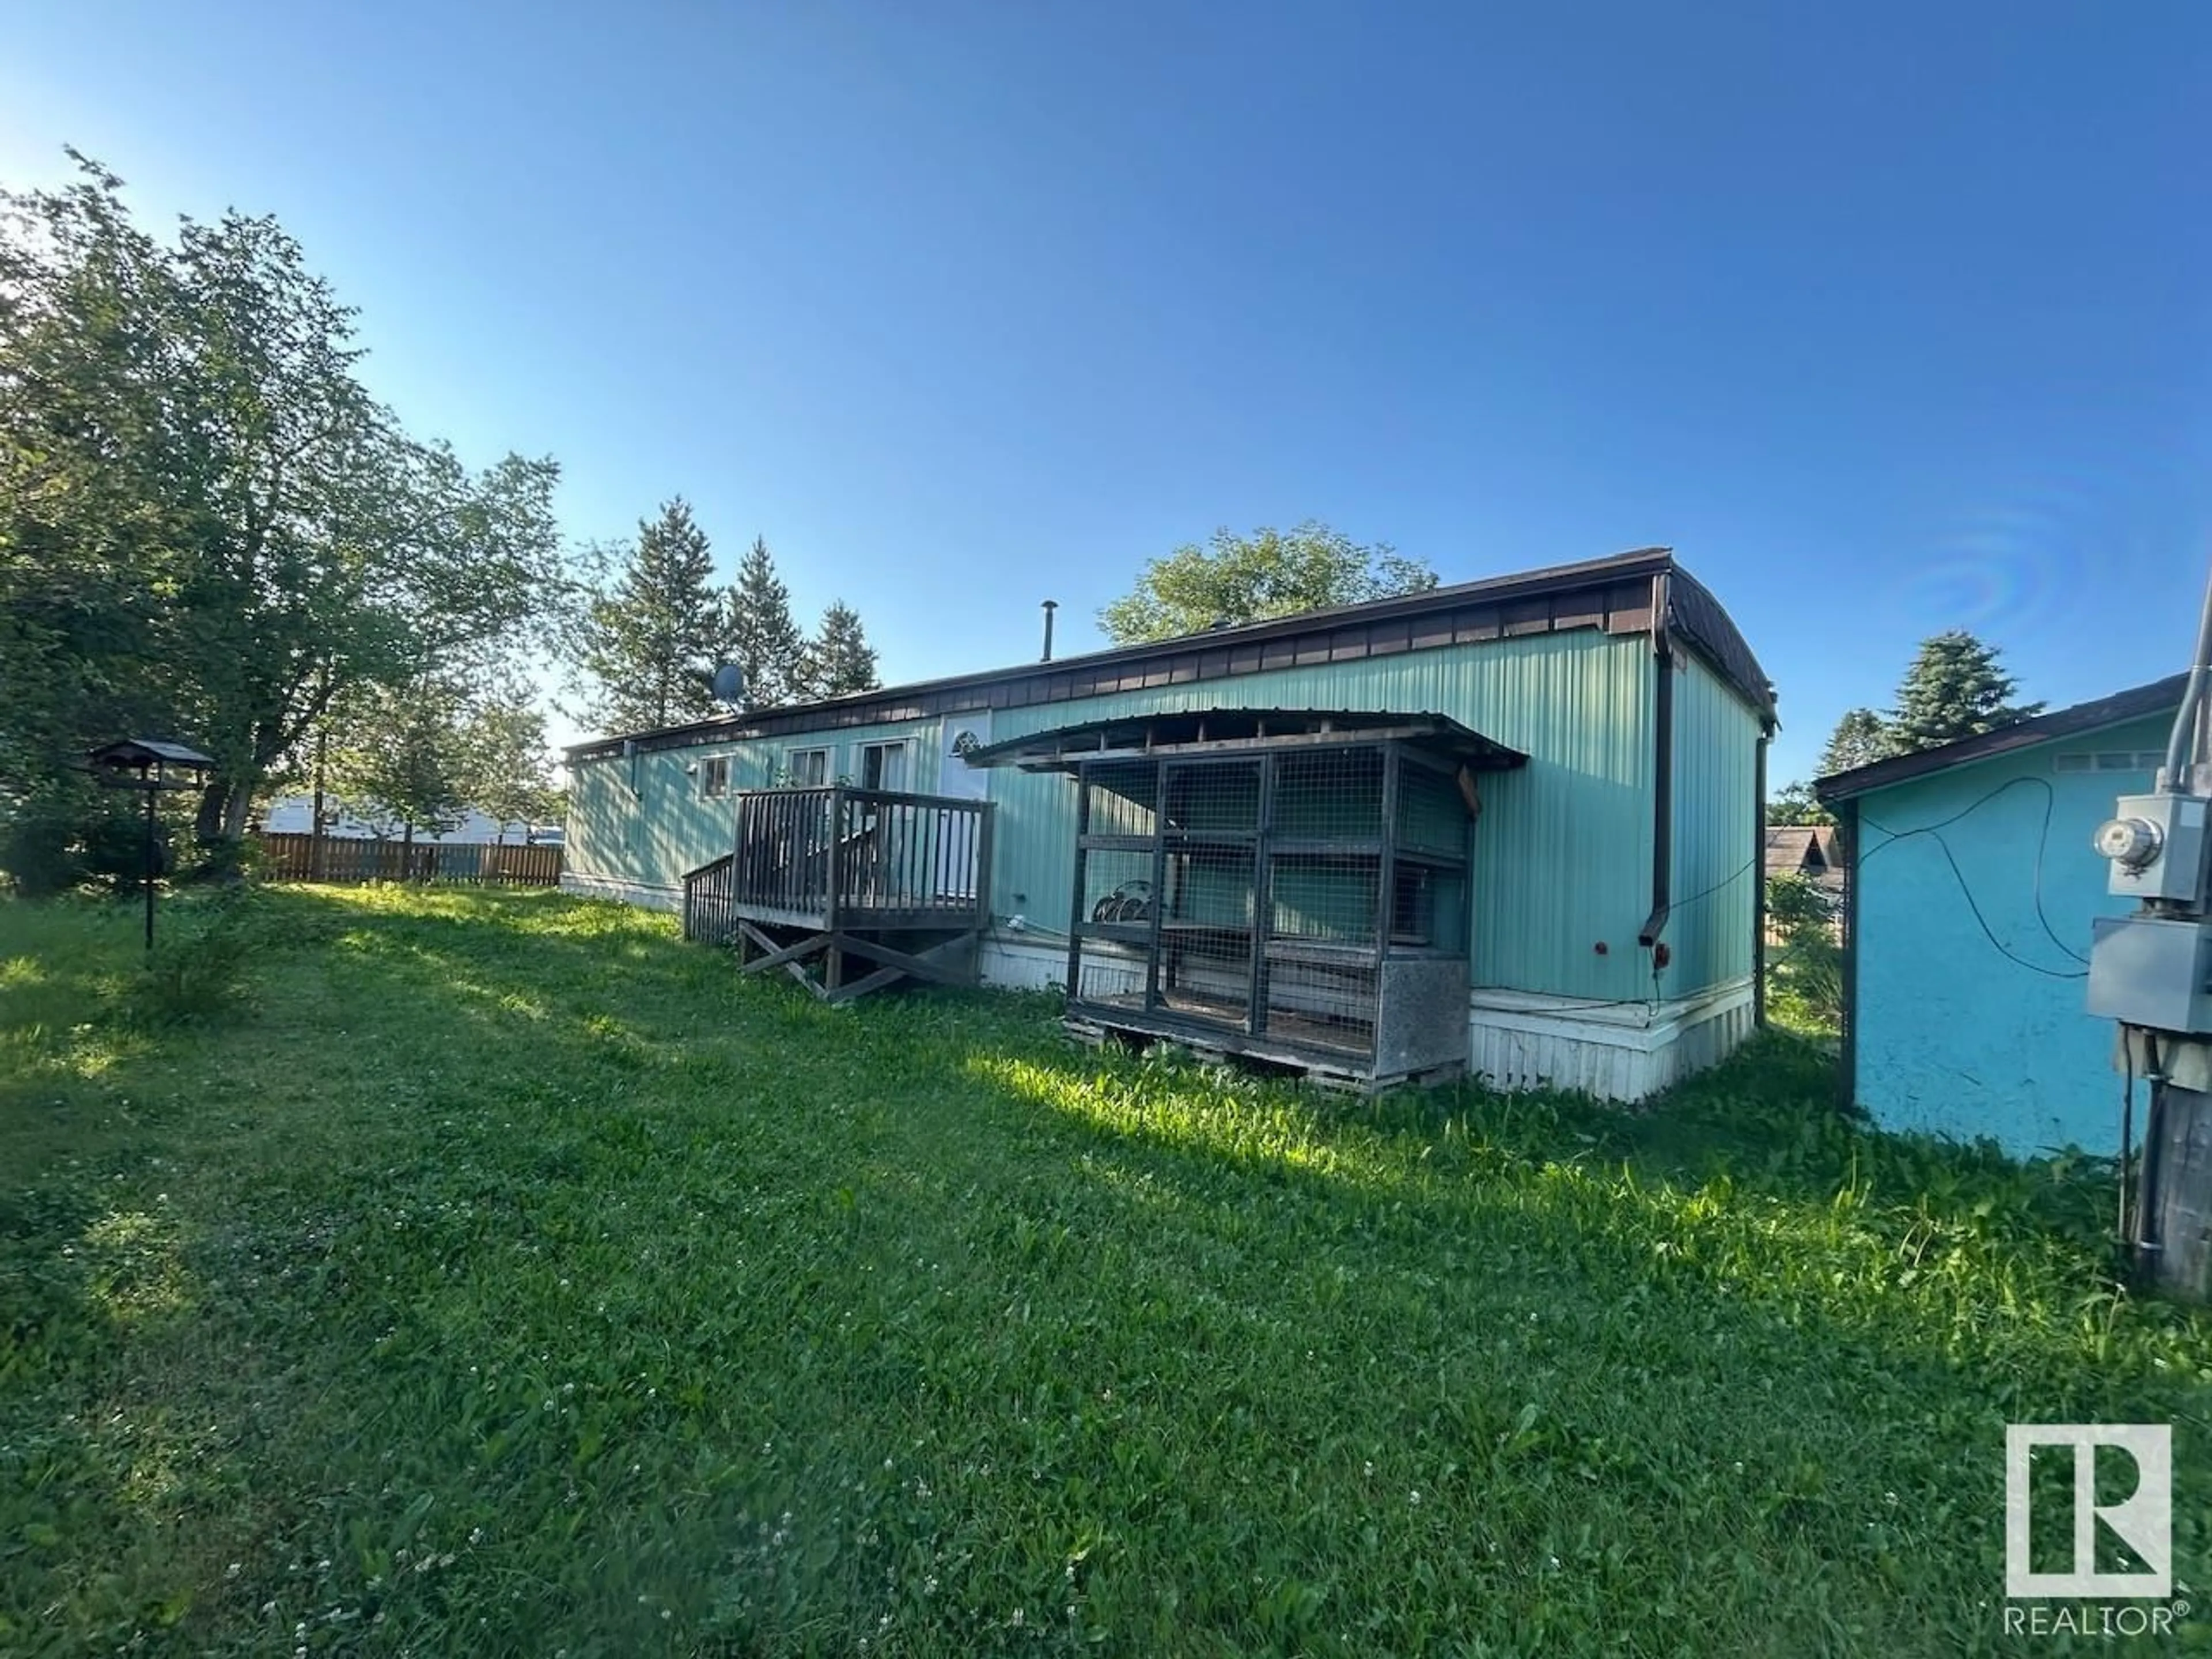 Shed for 5112 51 ST, Entwistle Alberta T0E0S0